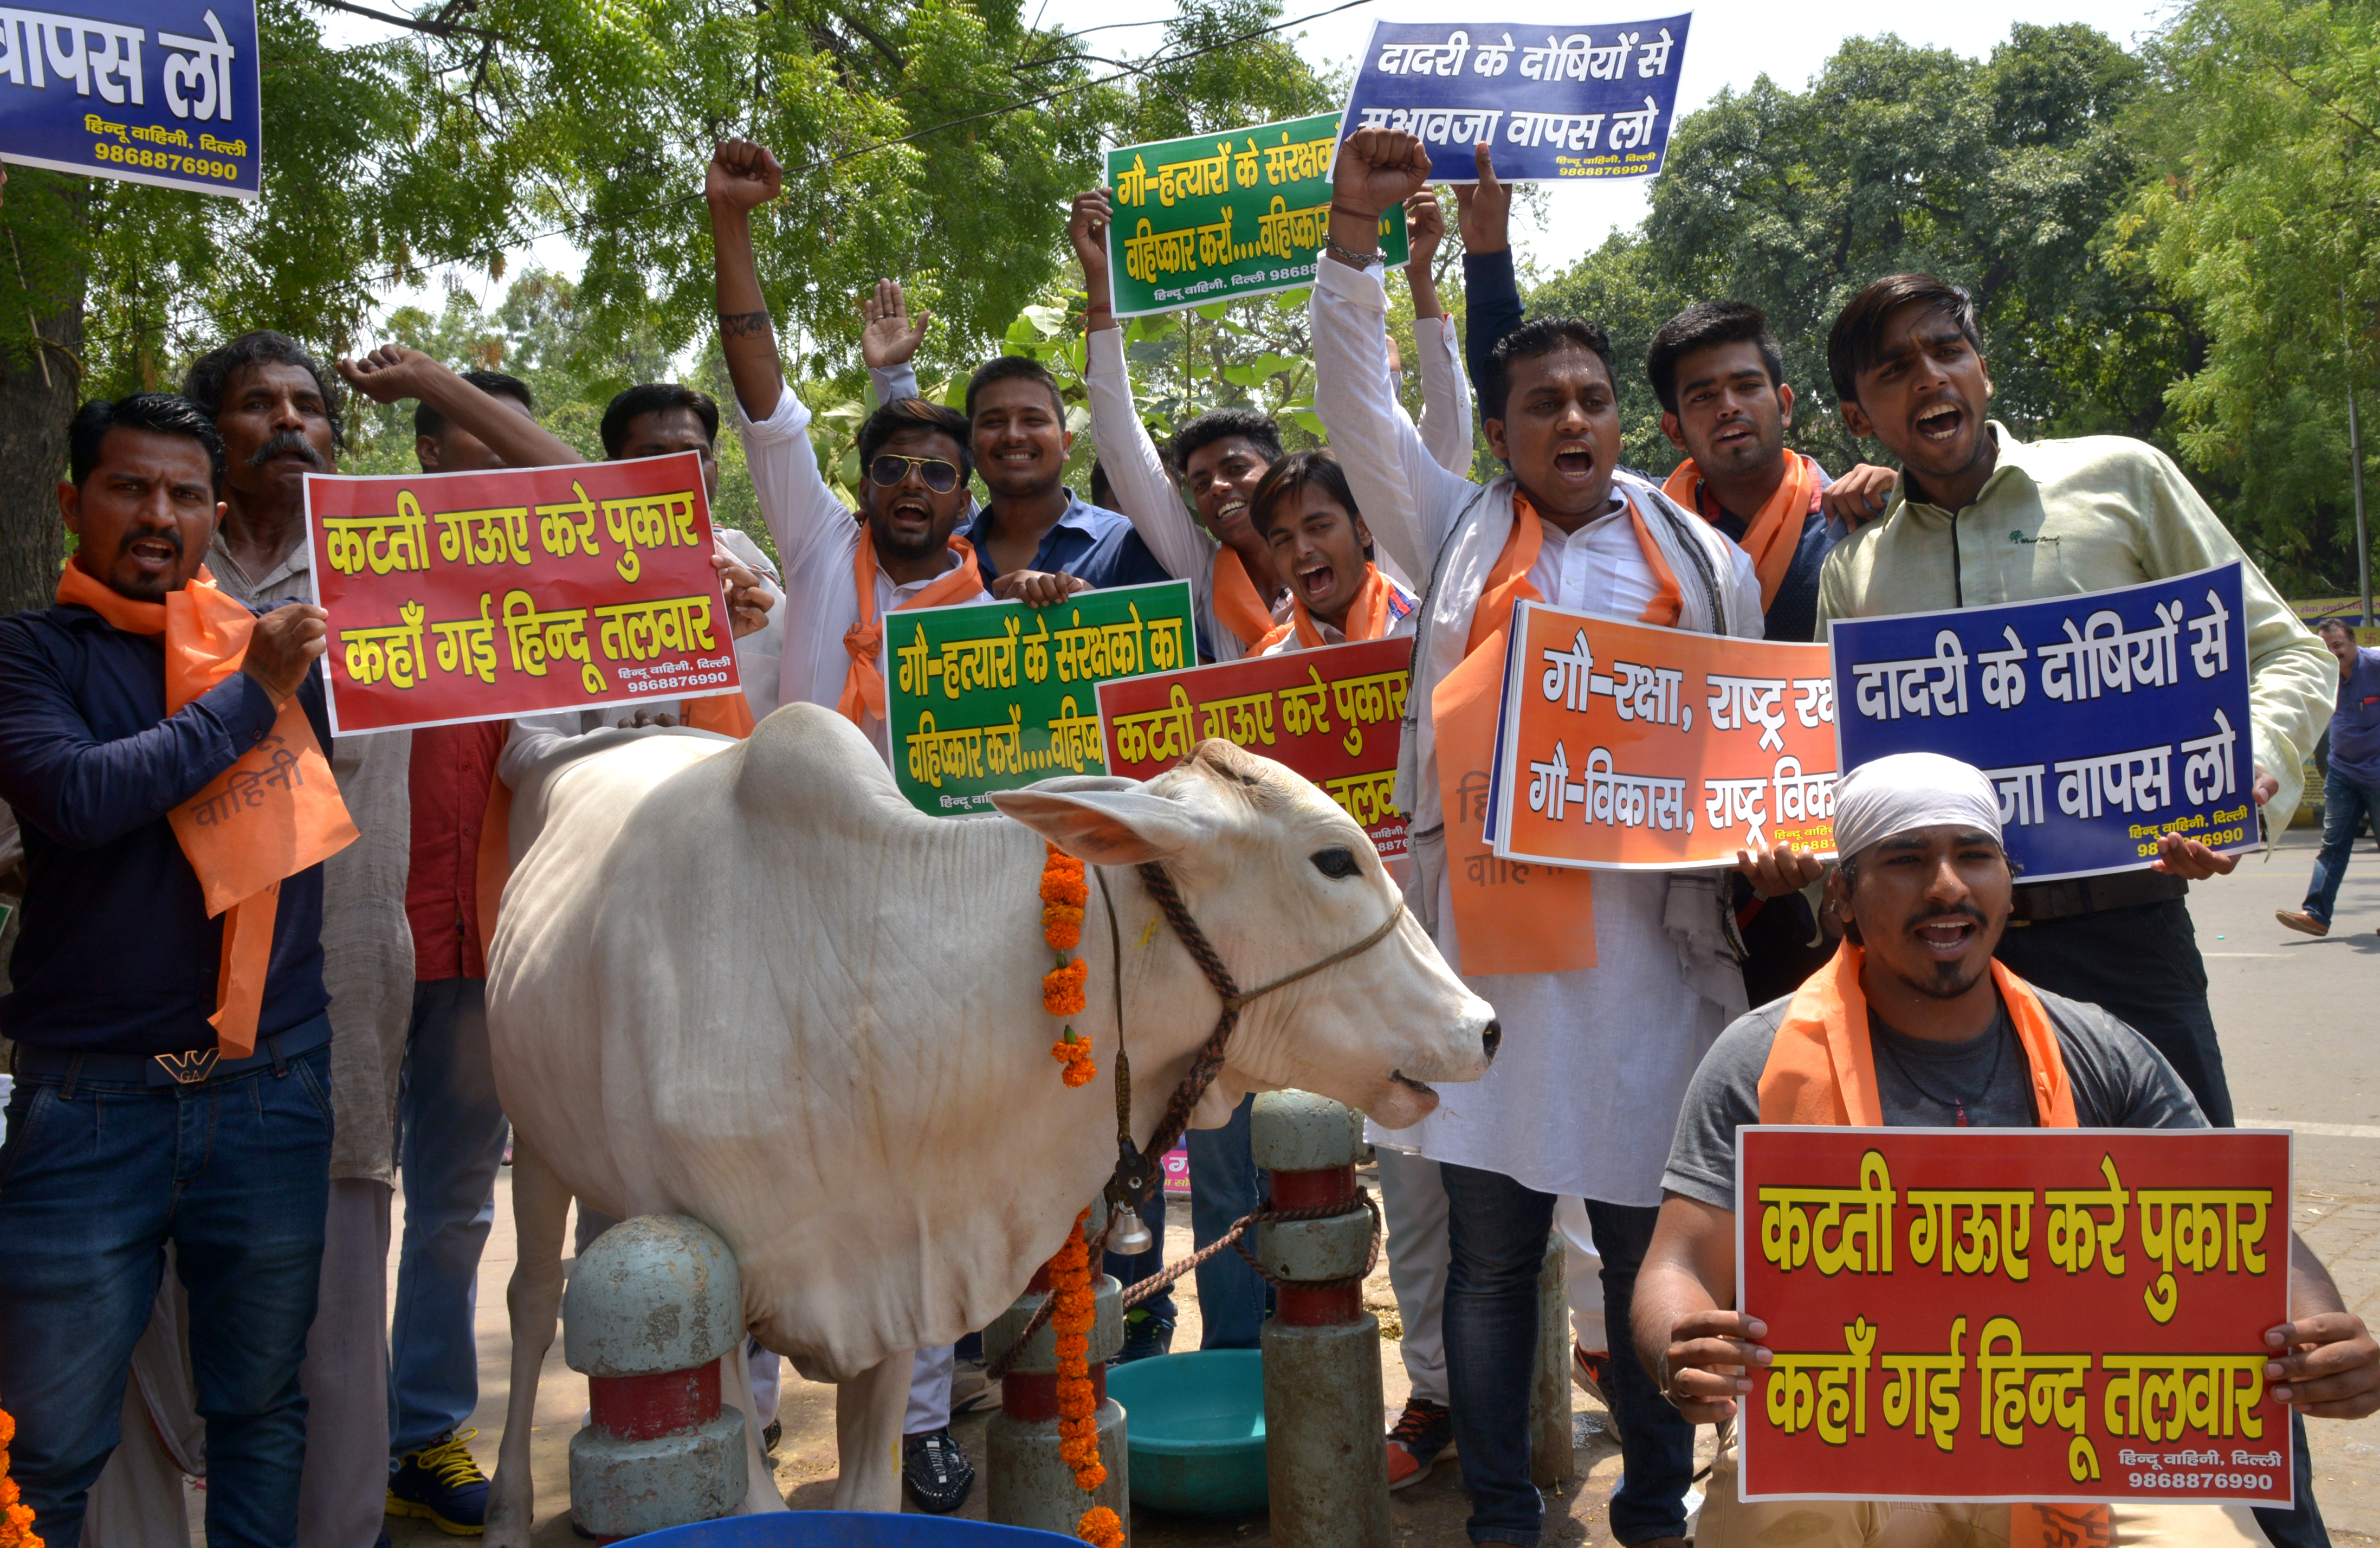 Members of a Hindu group at a protest march over cow protection at Parliament Street in New Delhi on June 5, 2016 (K Asif—The India Today Group/Getty Images)